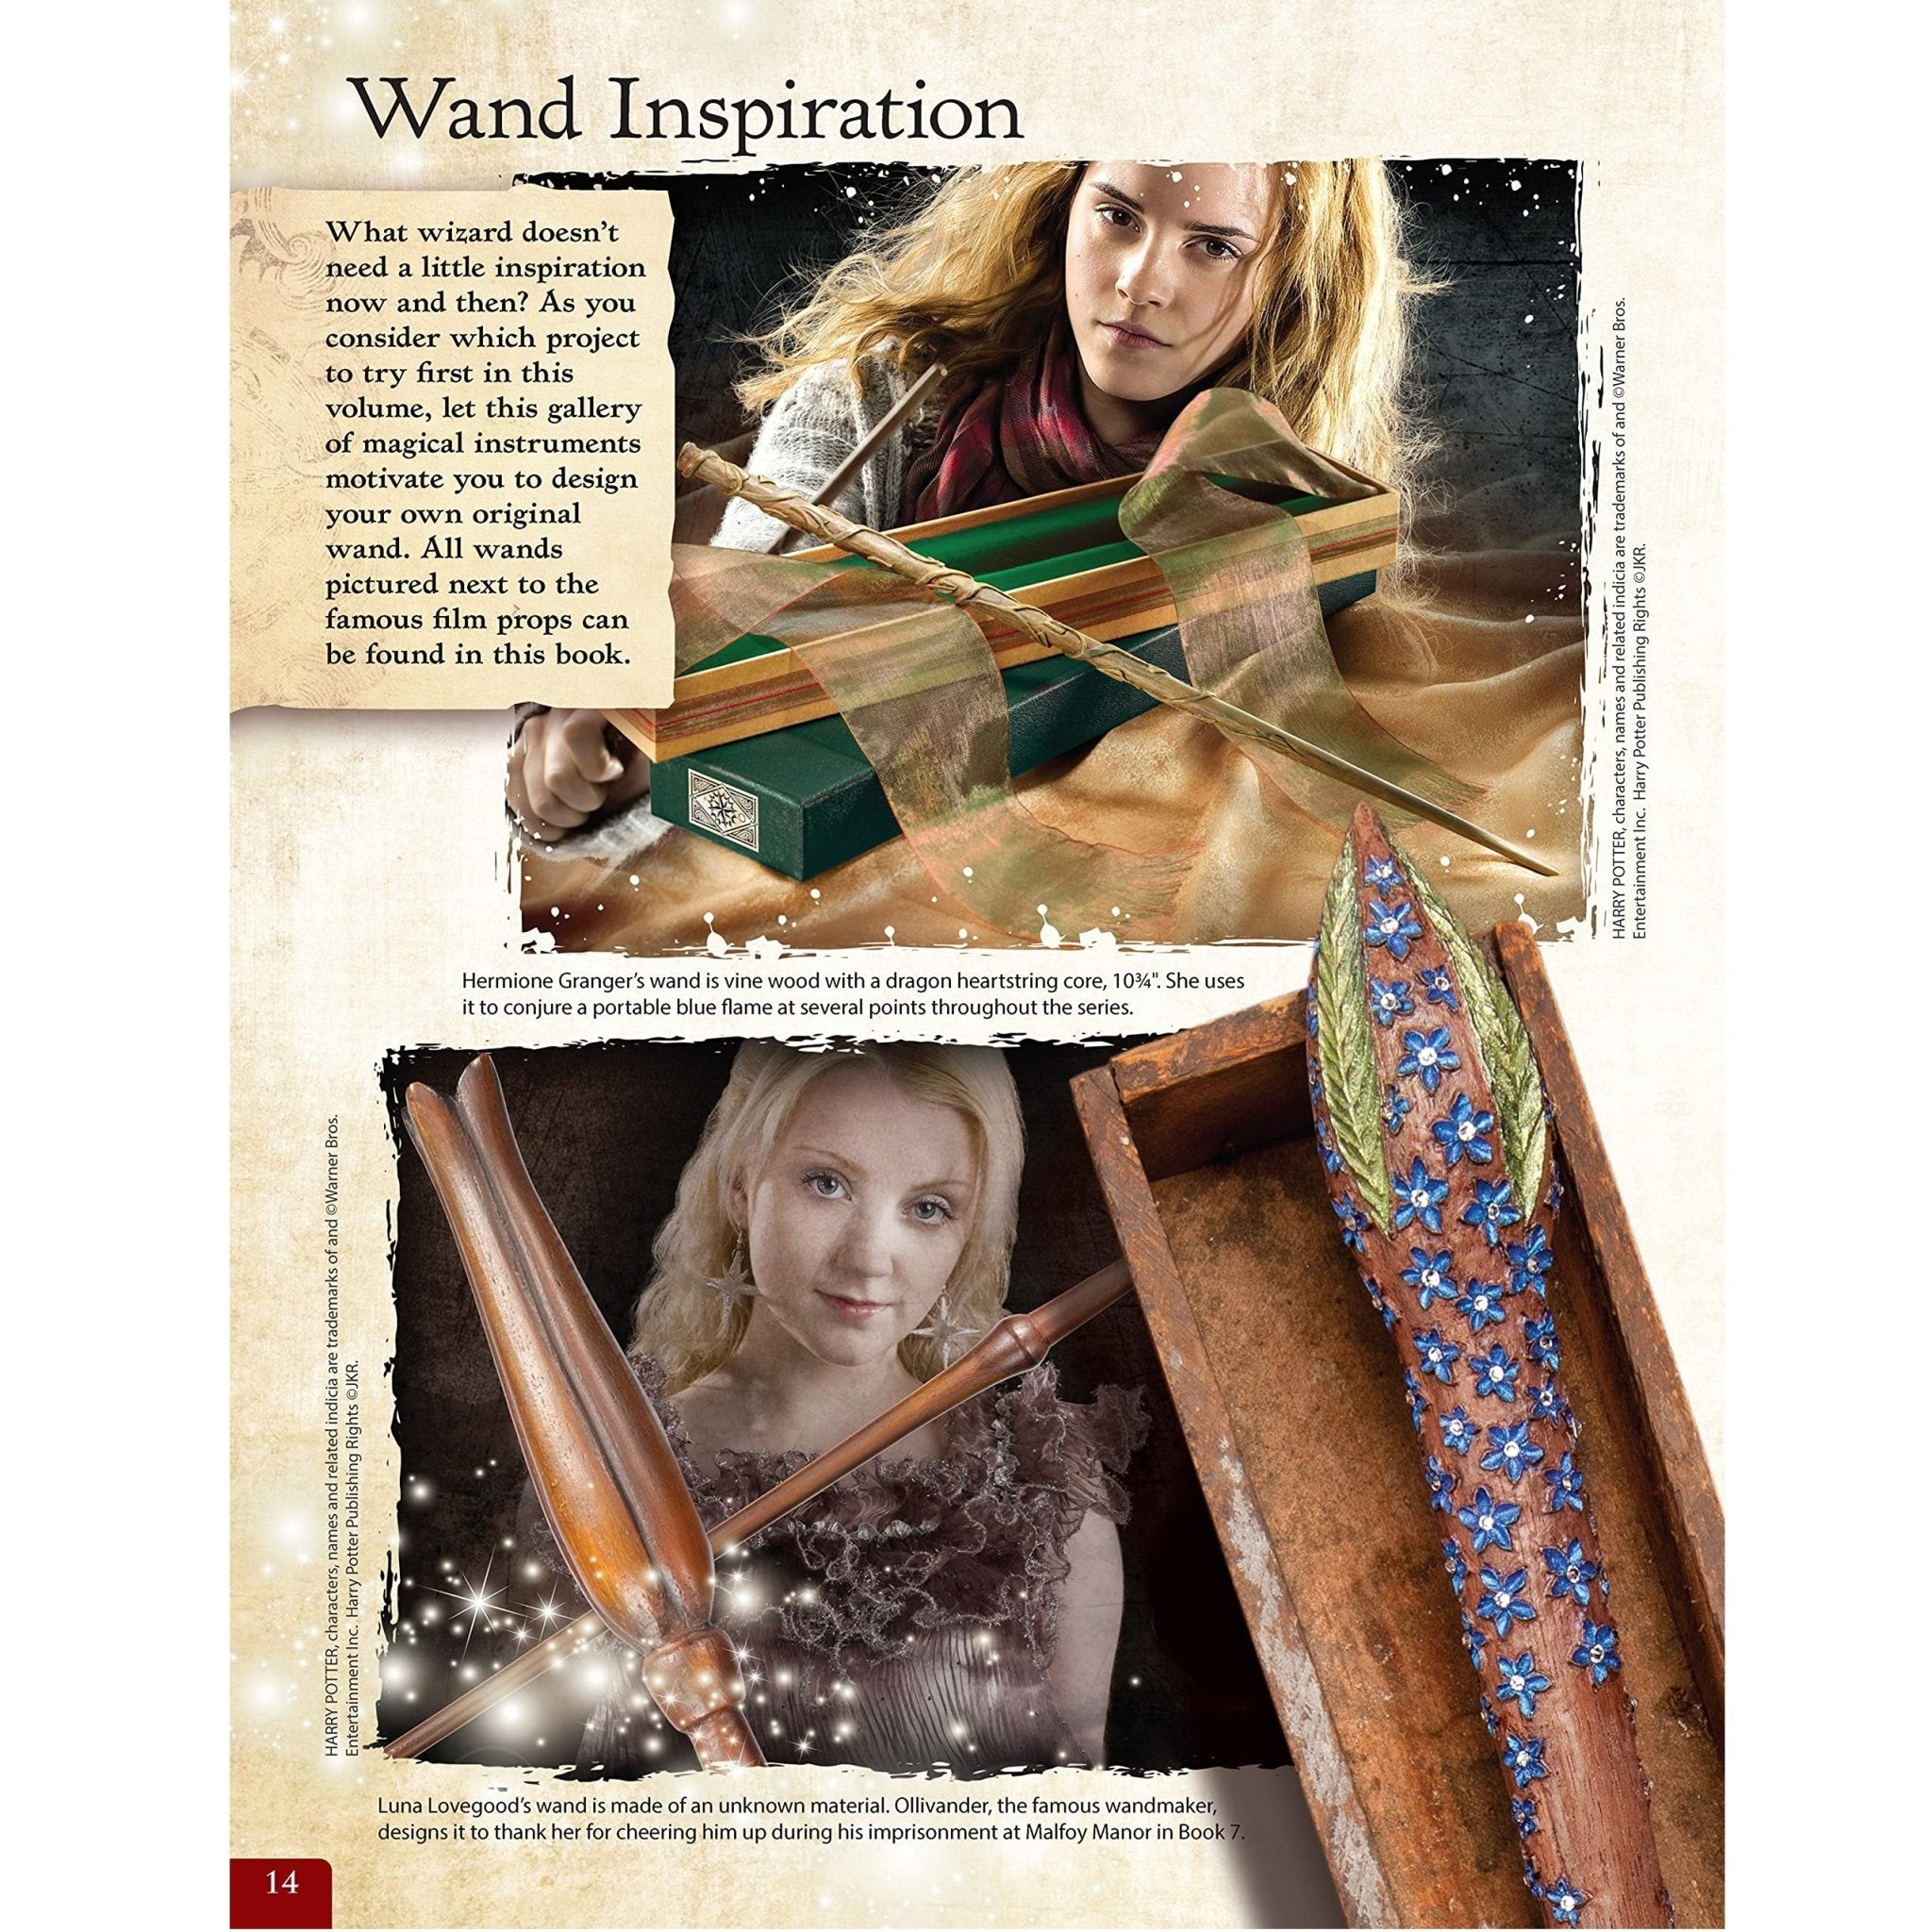 Compendium of Wooden Wand Making Techniques: Mastering the Enchanting Art of Carving, Turning, and Scrolling Wands Book